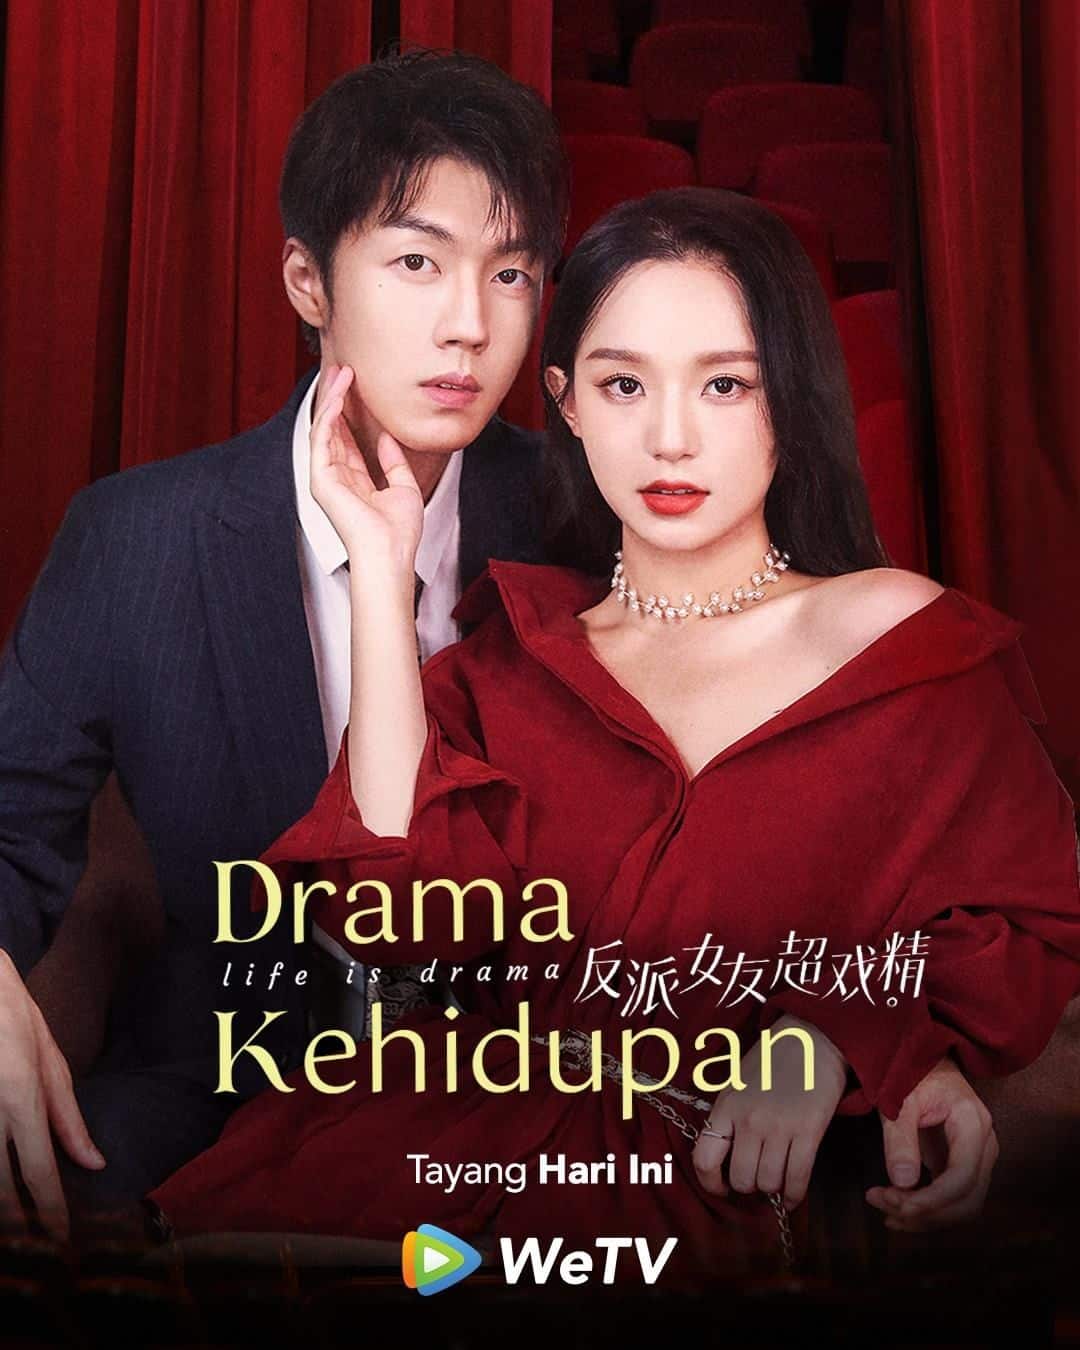 Life Is Drama - Sinopsis, Pemain, OST, Episode, Review